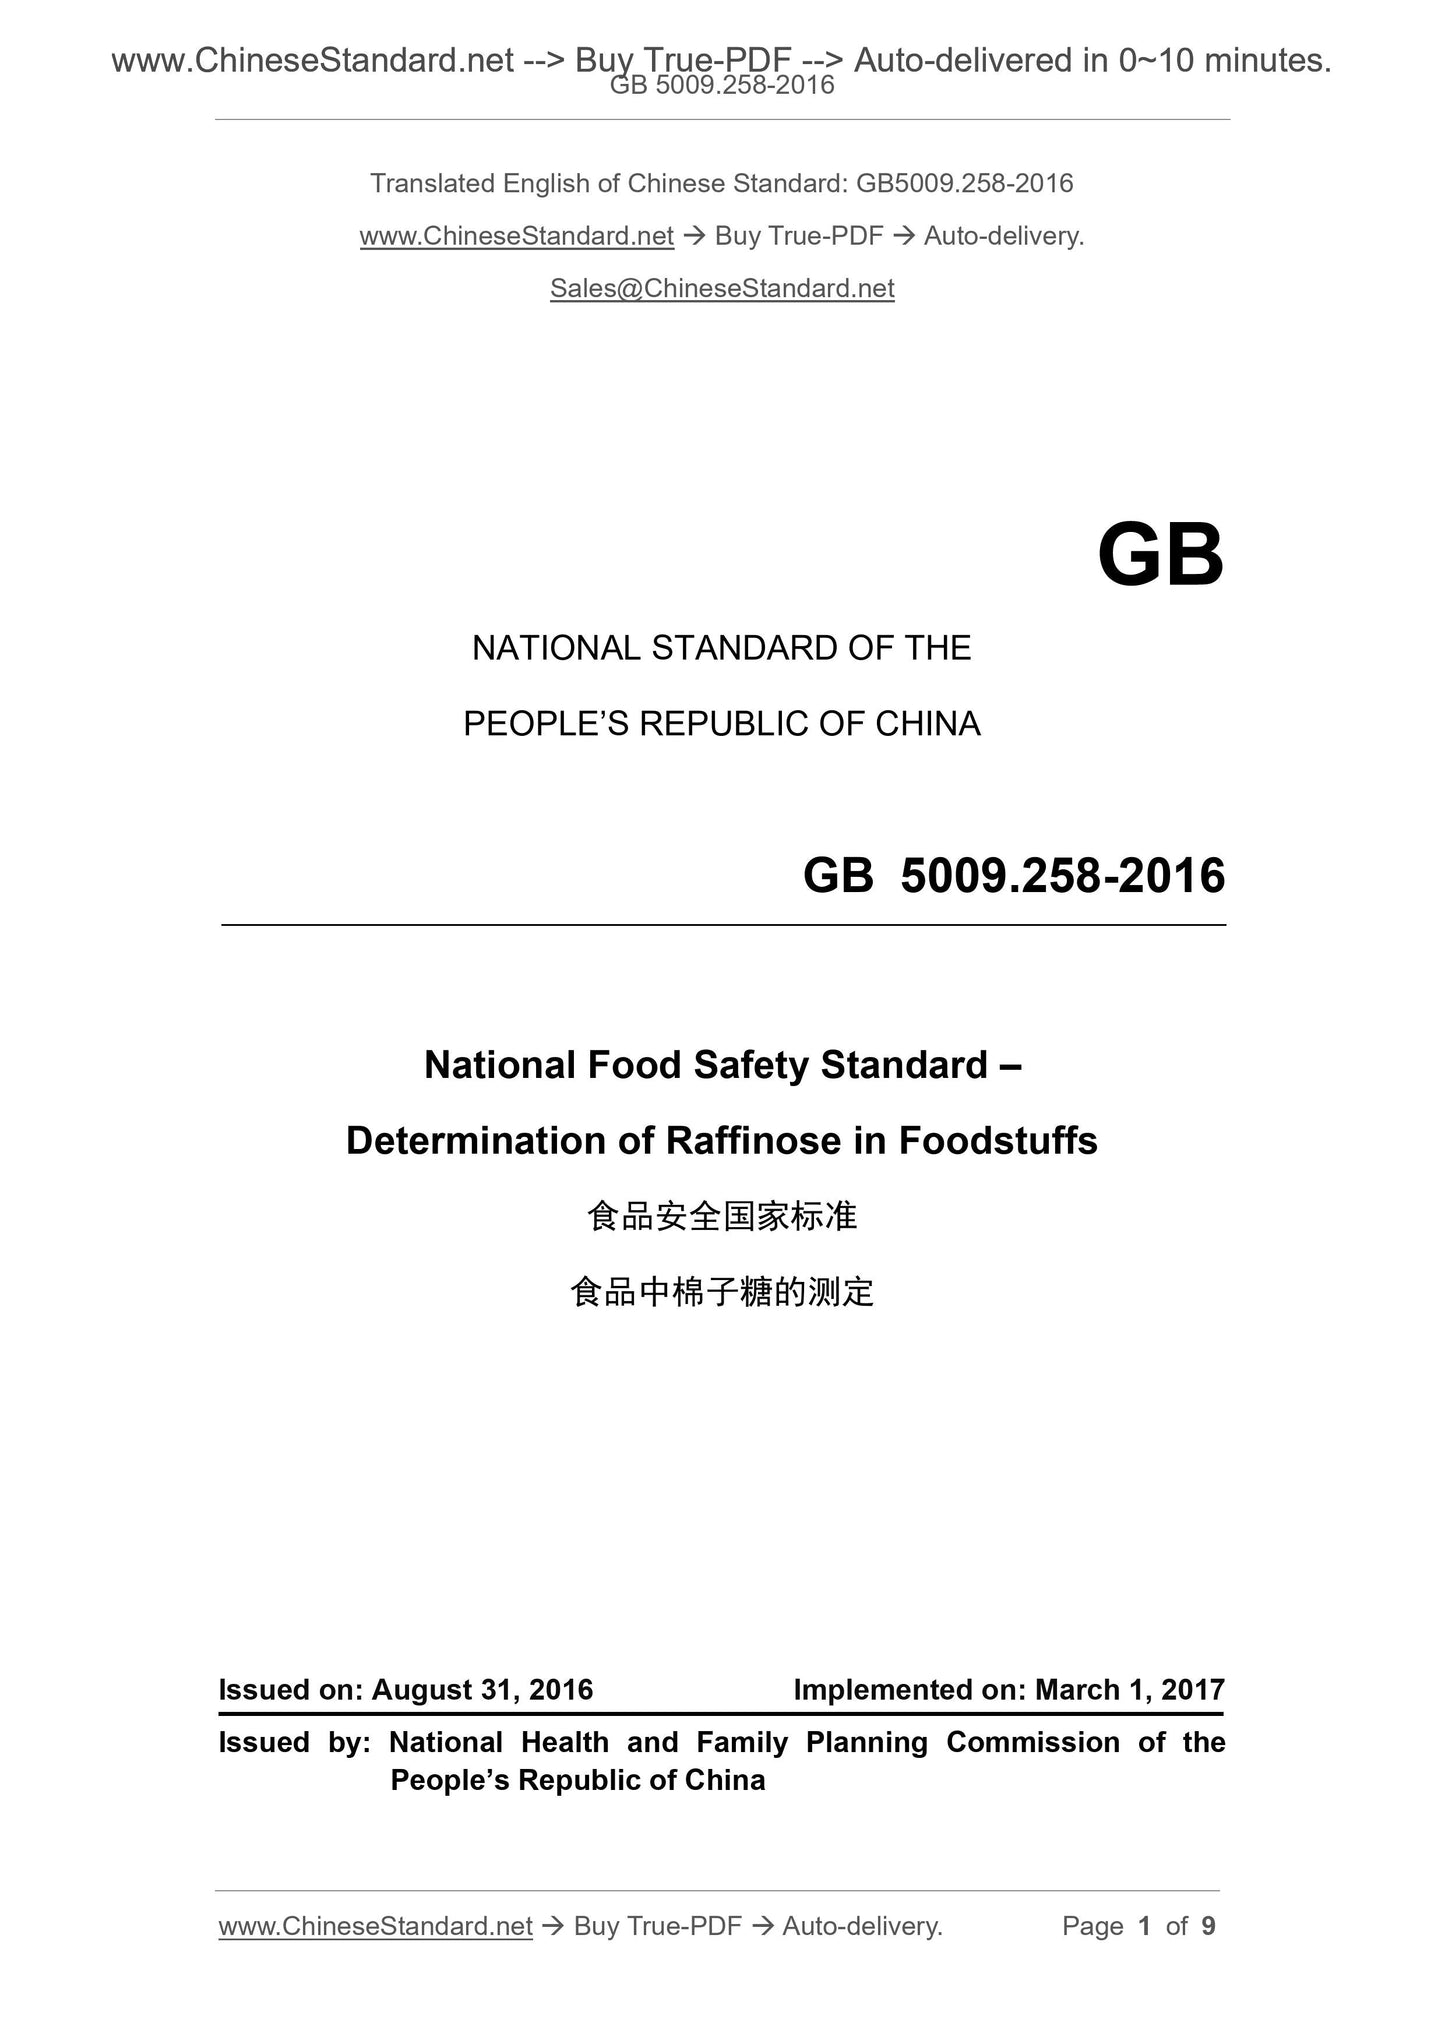 GB 5009.258-2016 Page 1